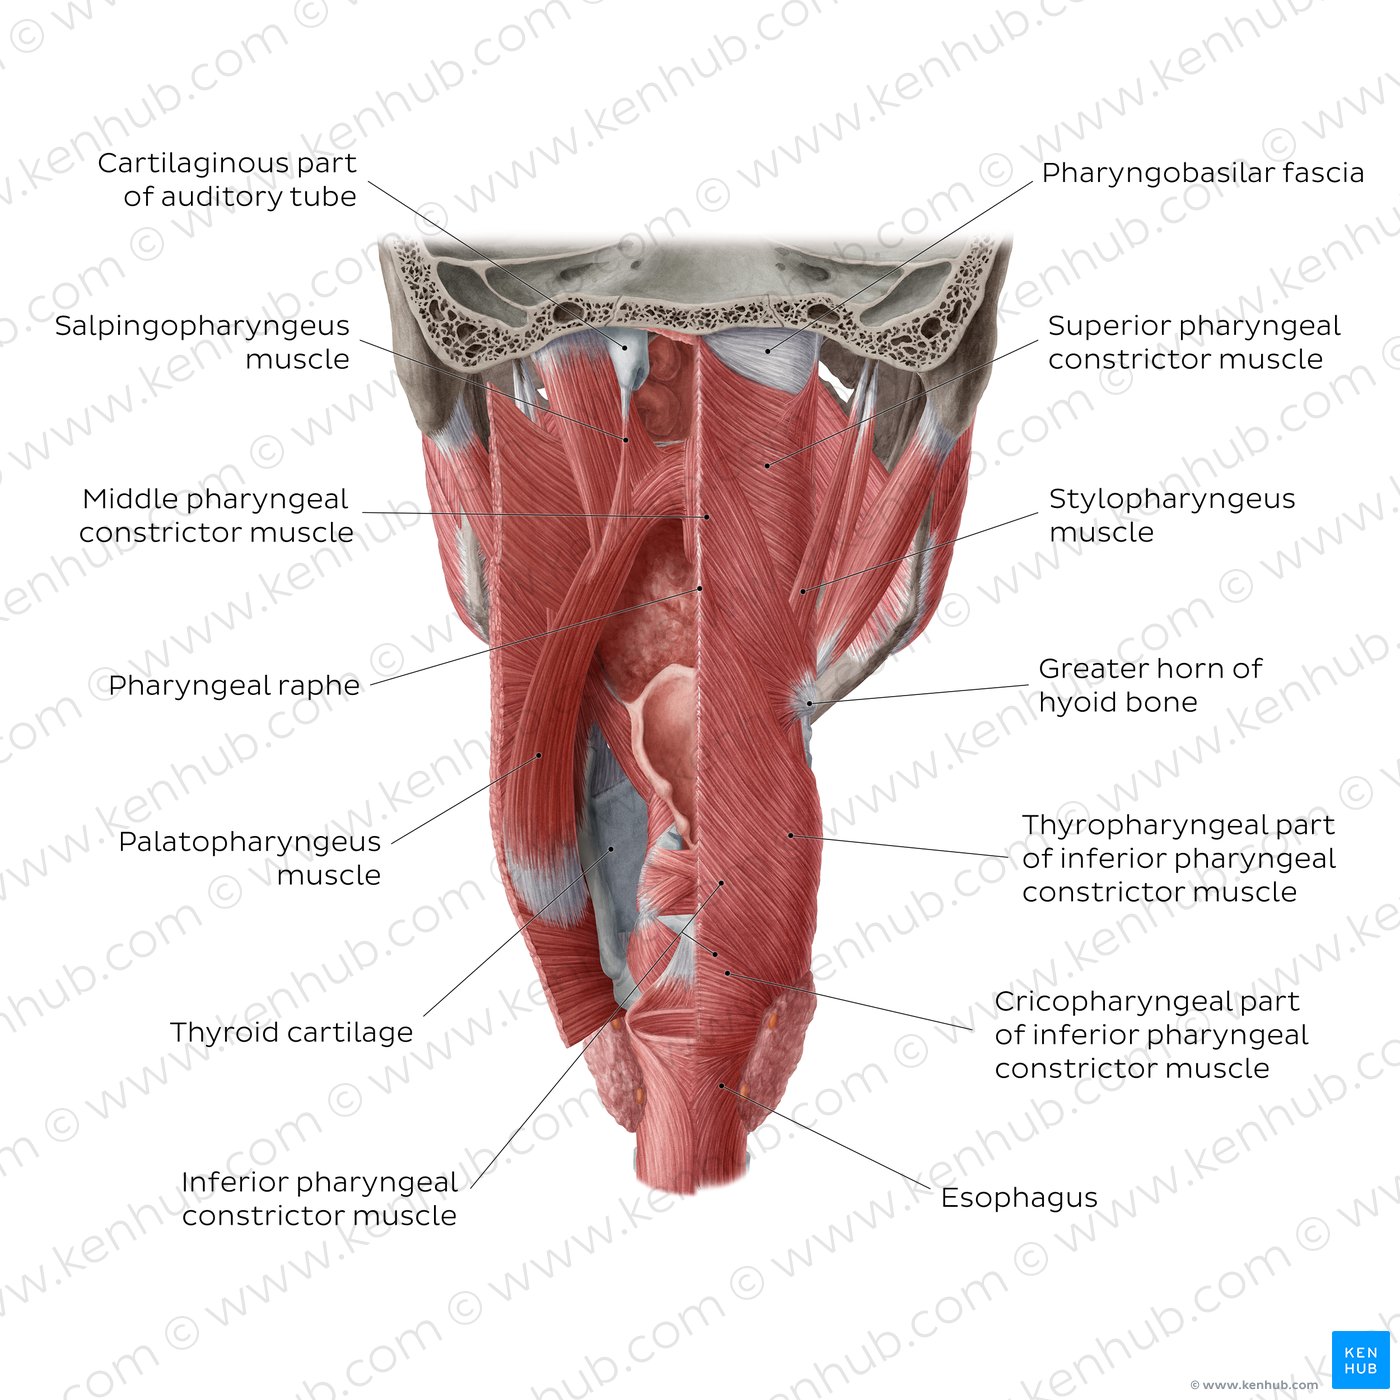 Muscles of the pharynx